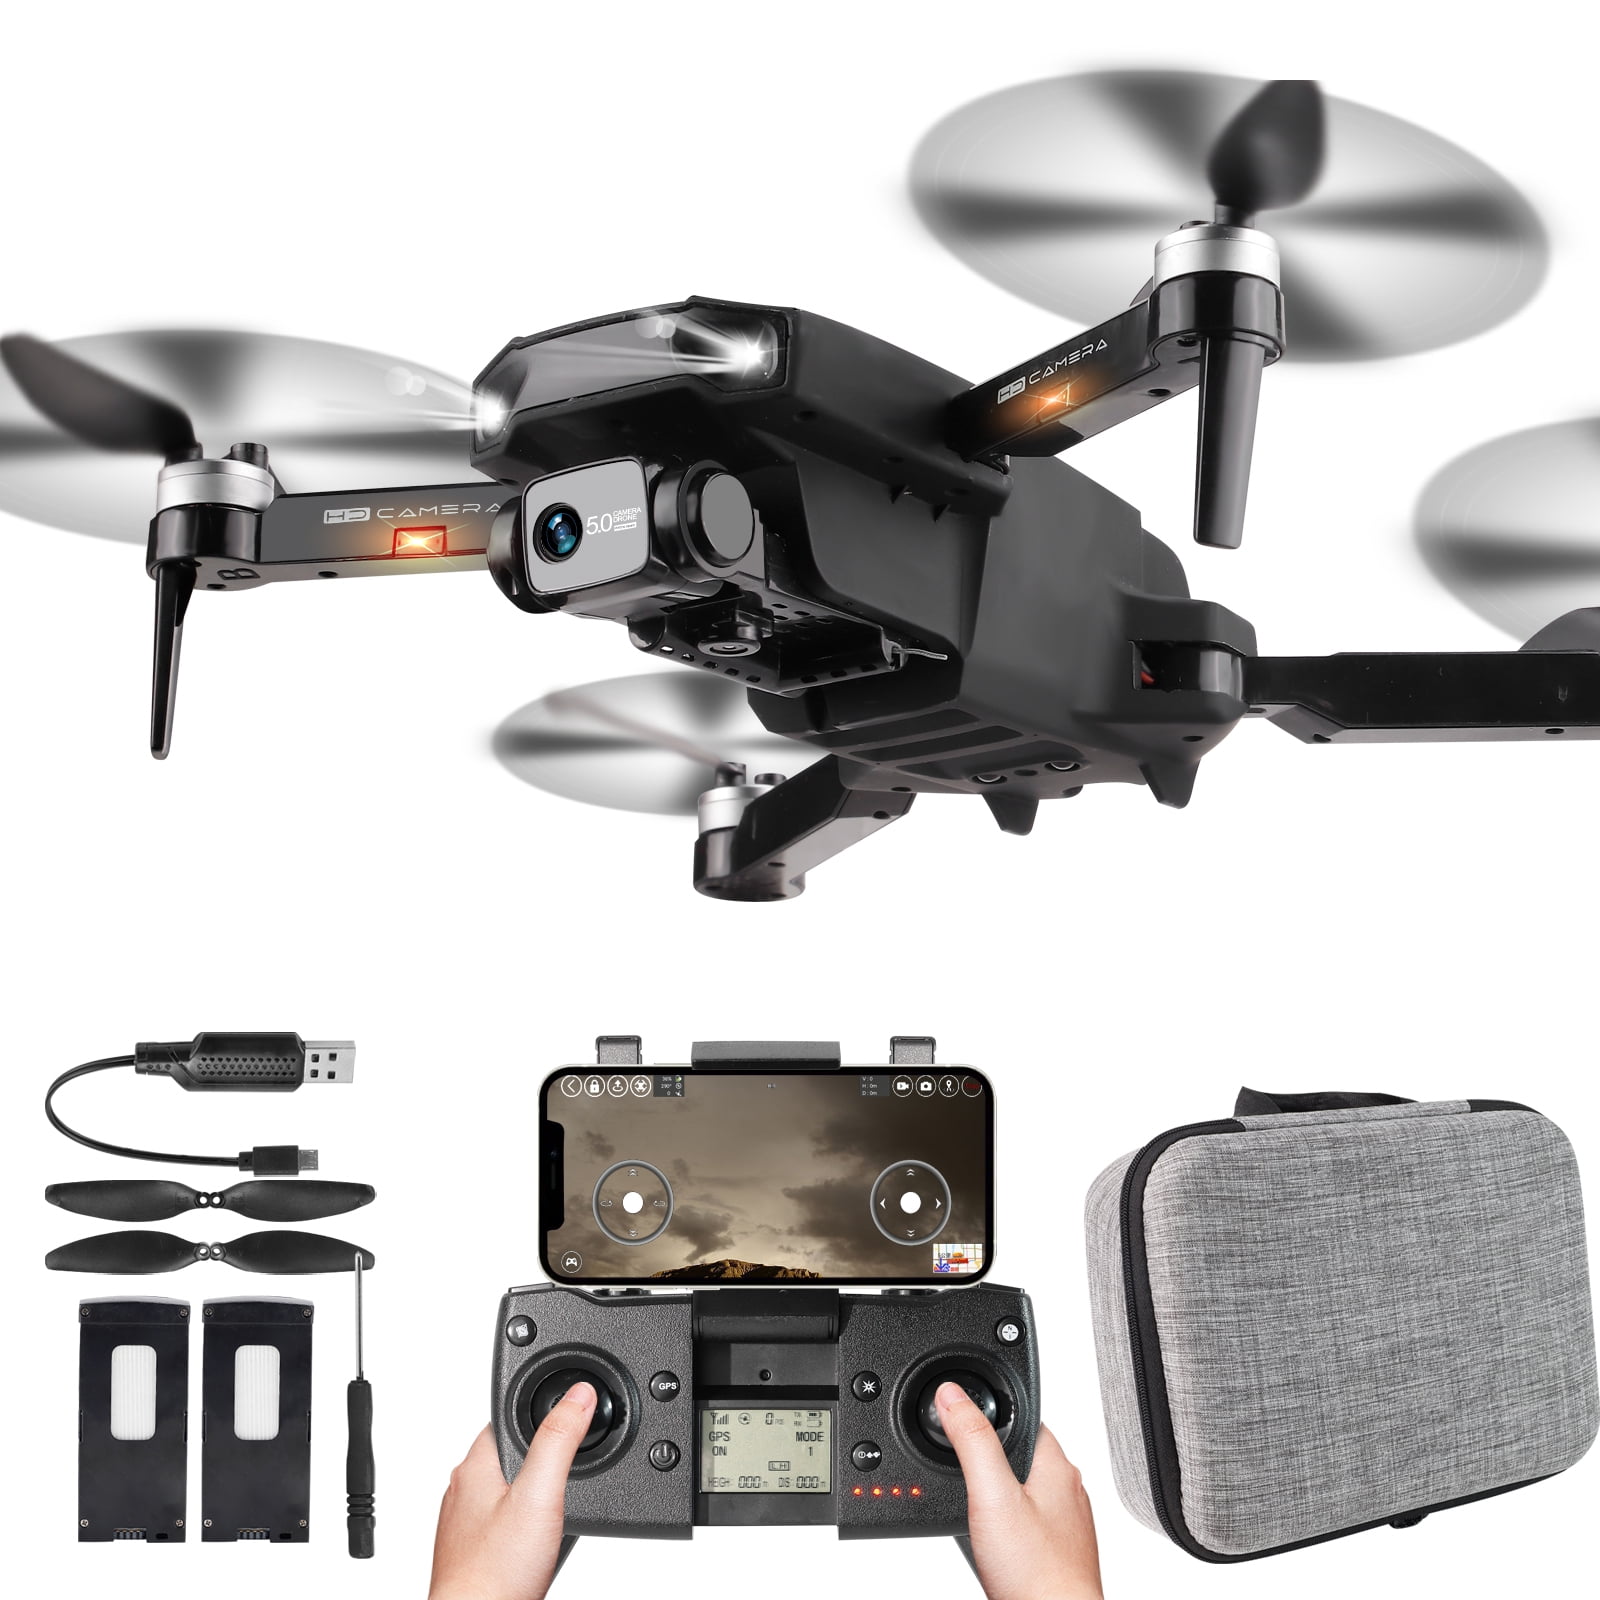 See the World From New Heights With This 4K Dual Camera Drone, now 45% Off